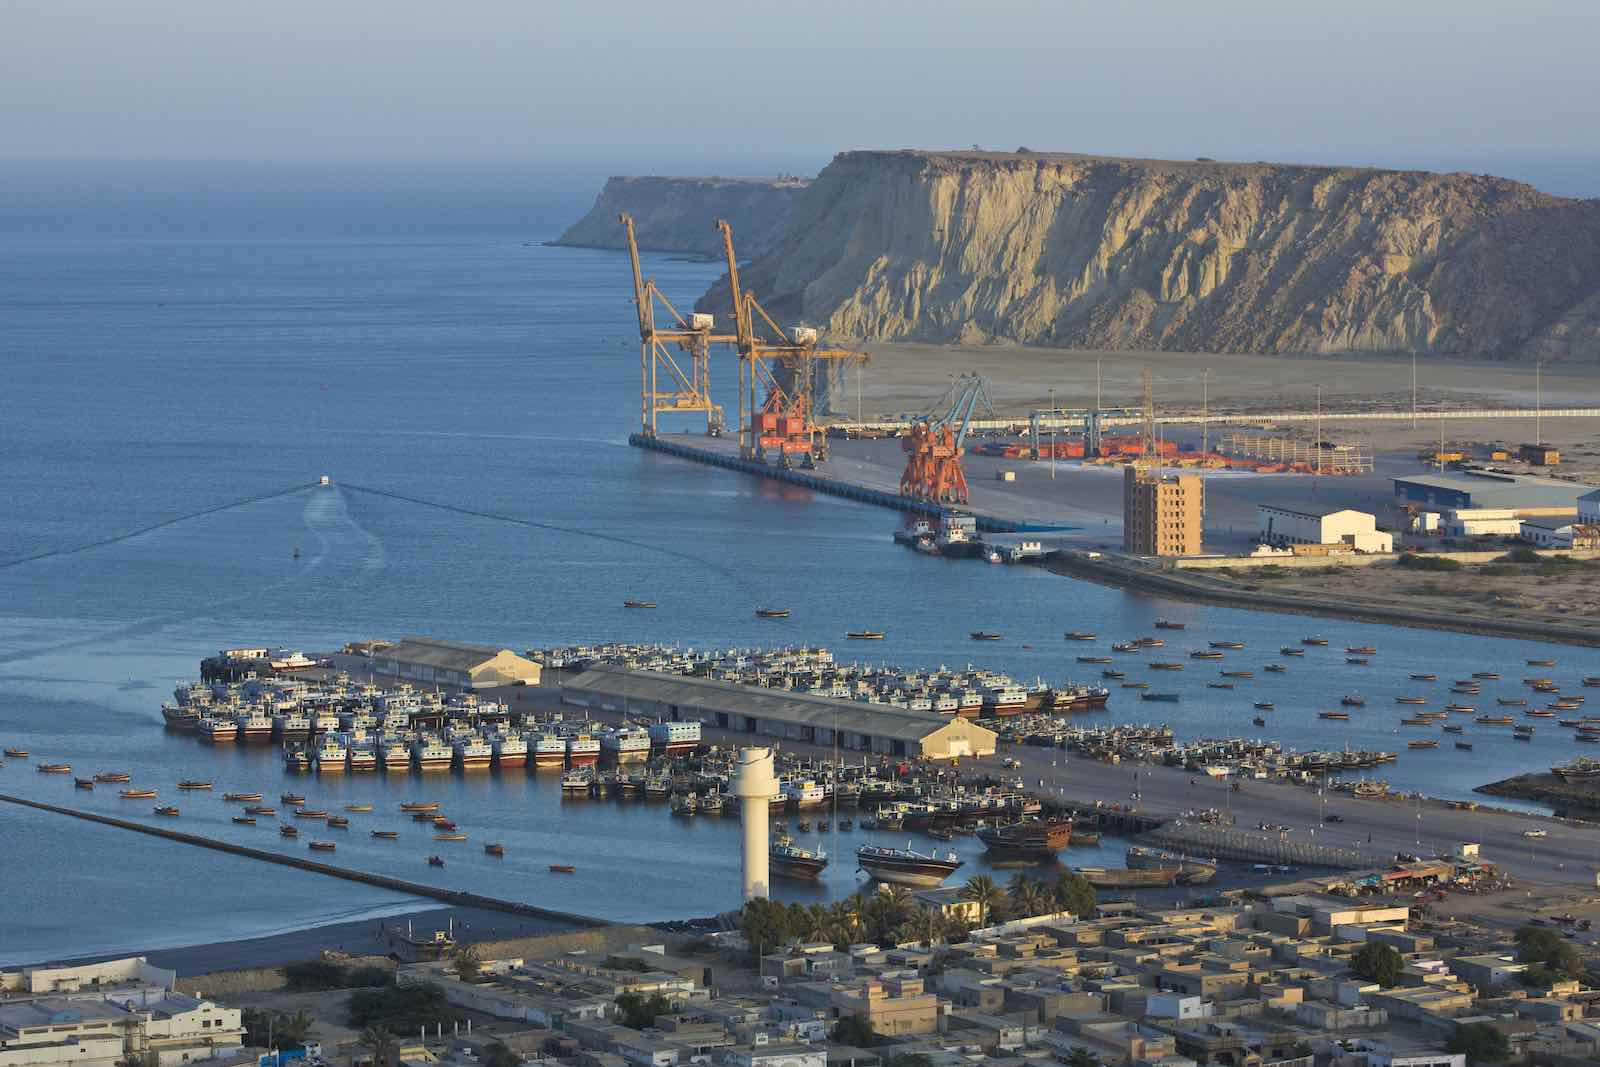 Gwadar Port, Gwadar, Balochistan. The port is the most important element in the China-Pakistan Economic Corridor (CPEC). (Getty Images)